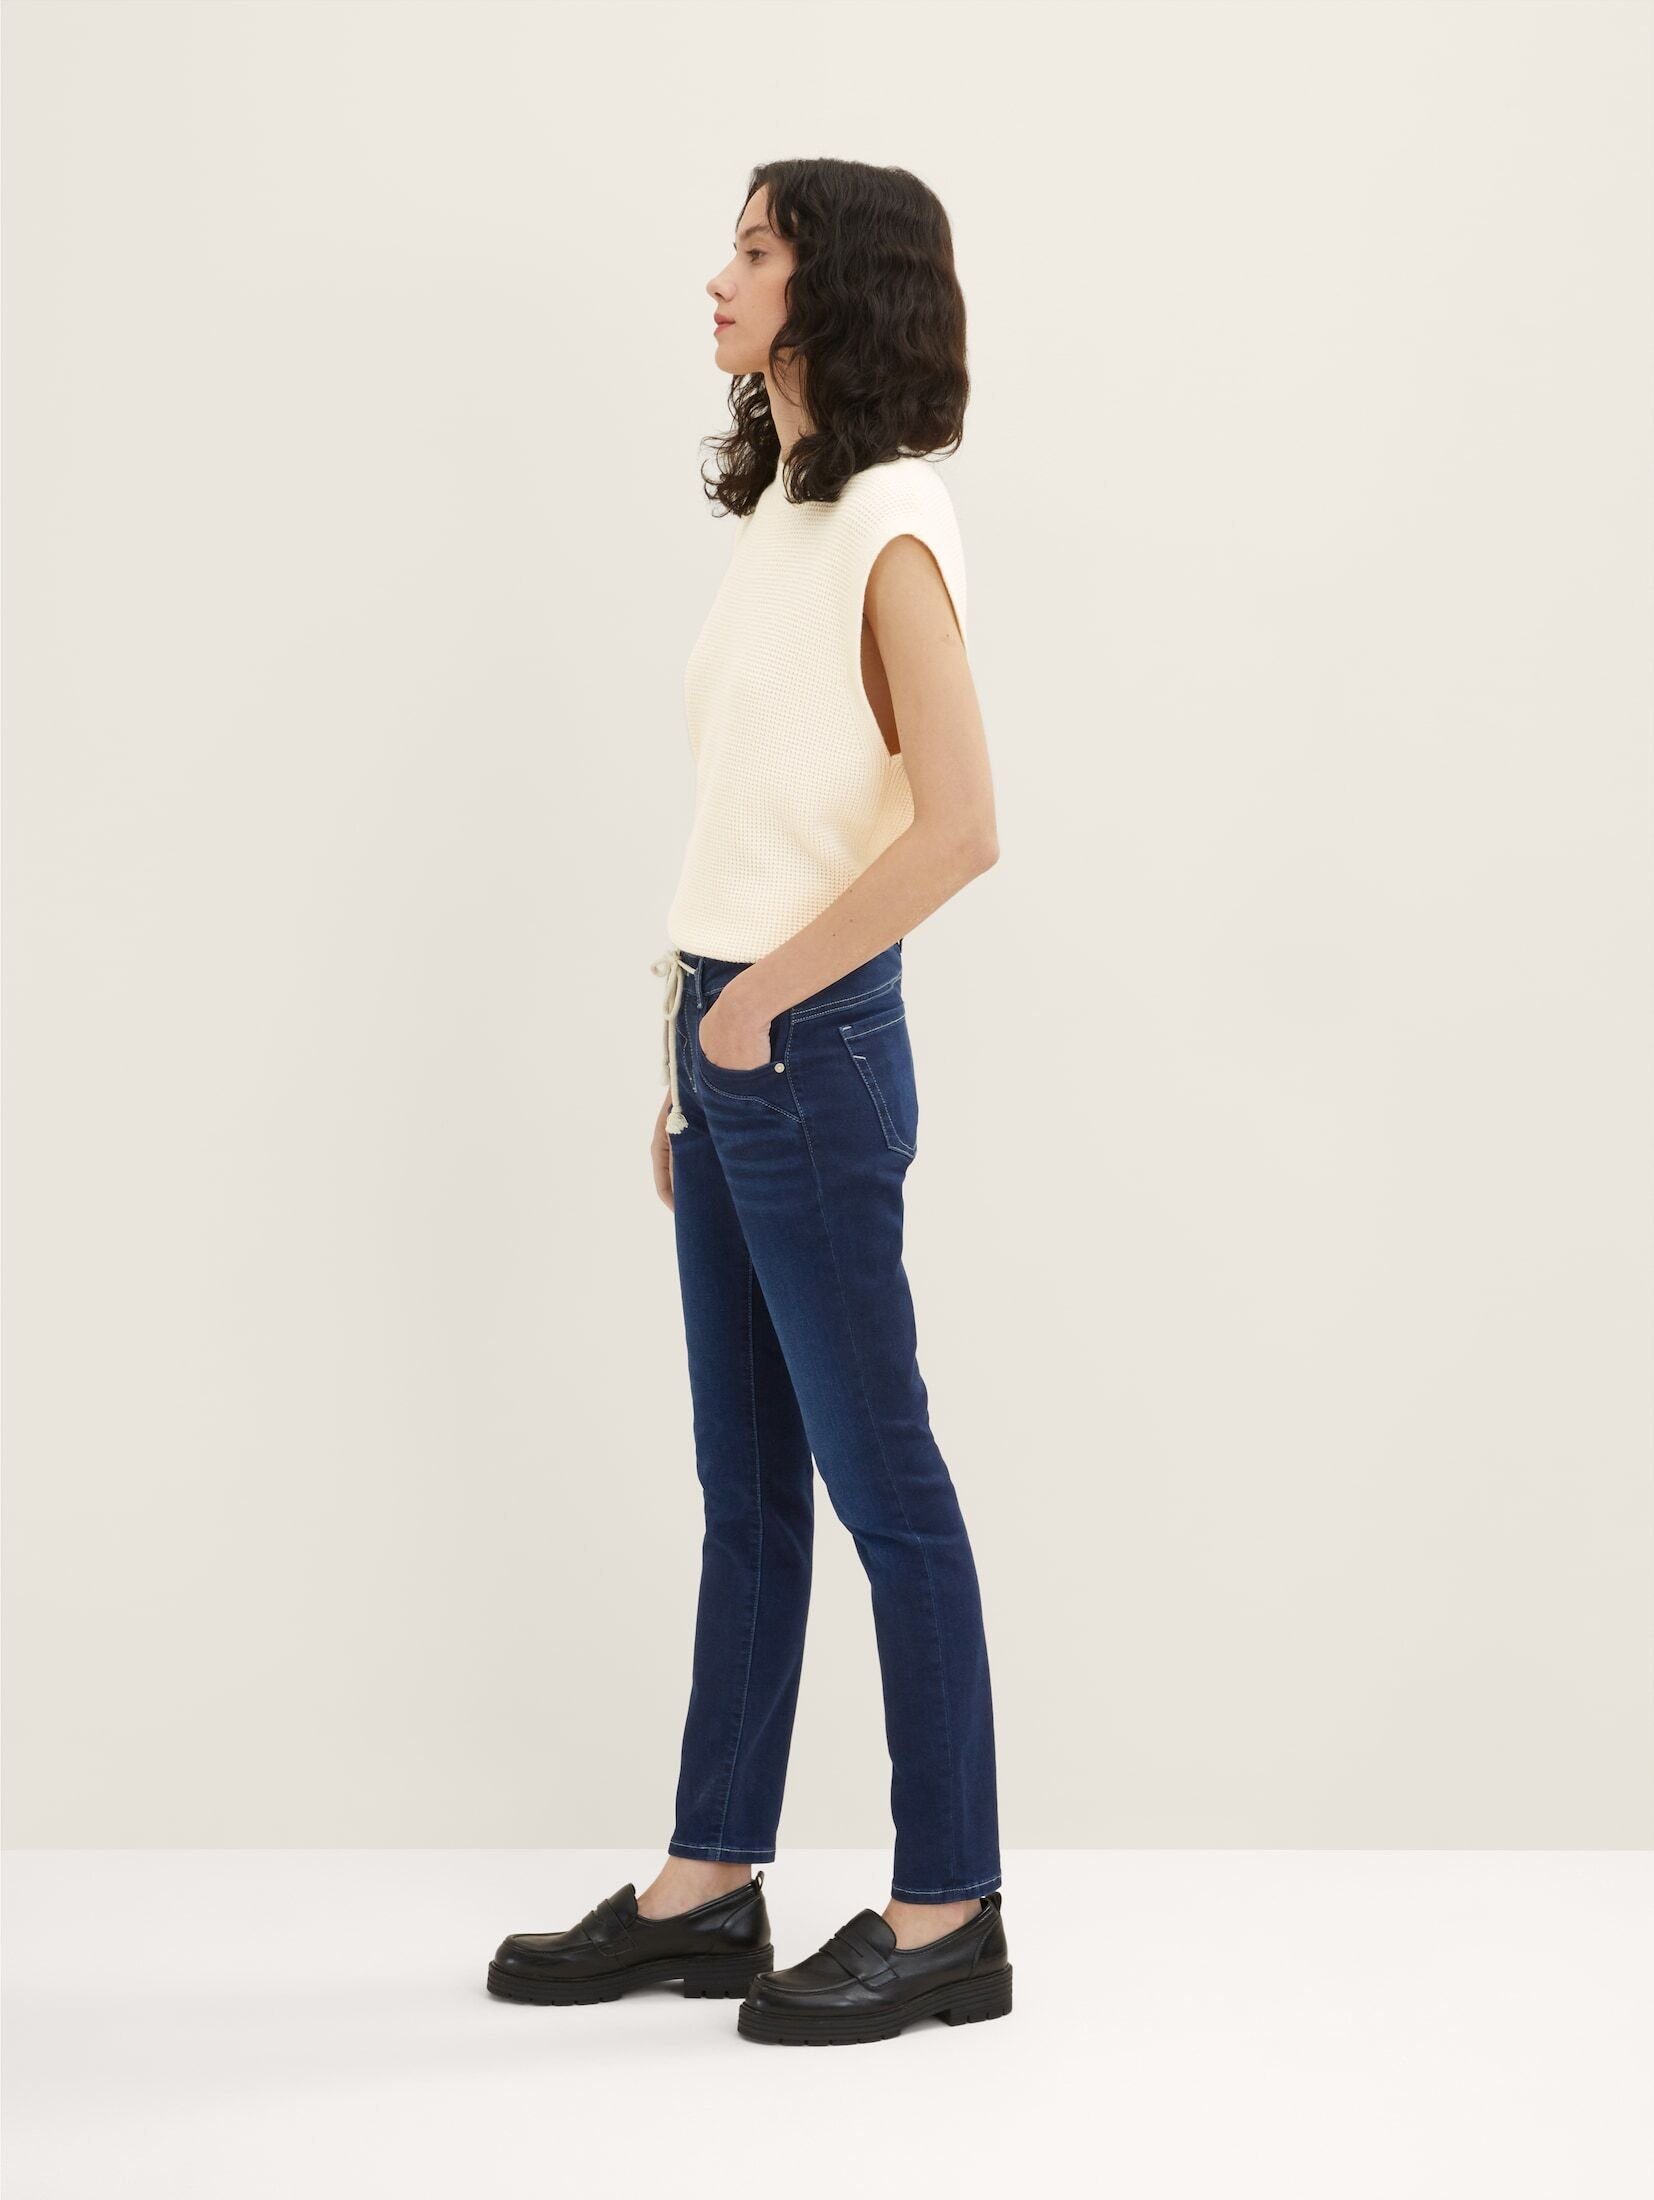 TAILOR Blue Jeans Relaxed Rinse Tapered Skinny-fit-Jeans Denim TOM